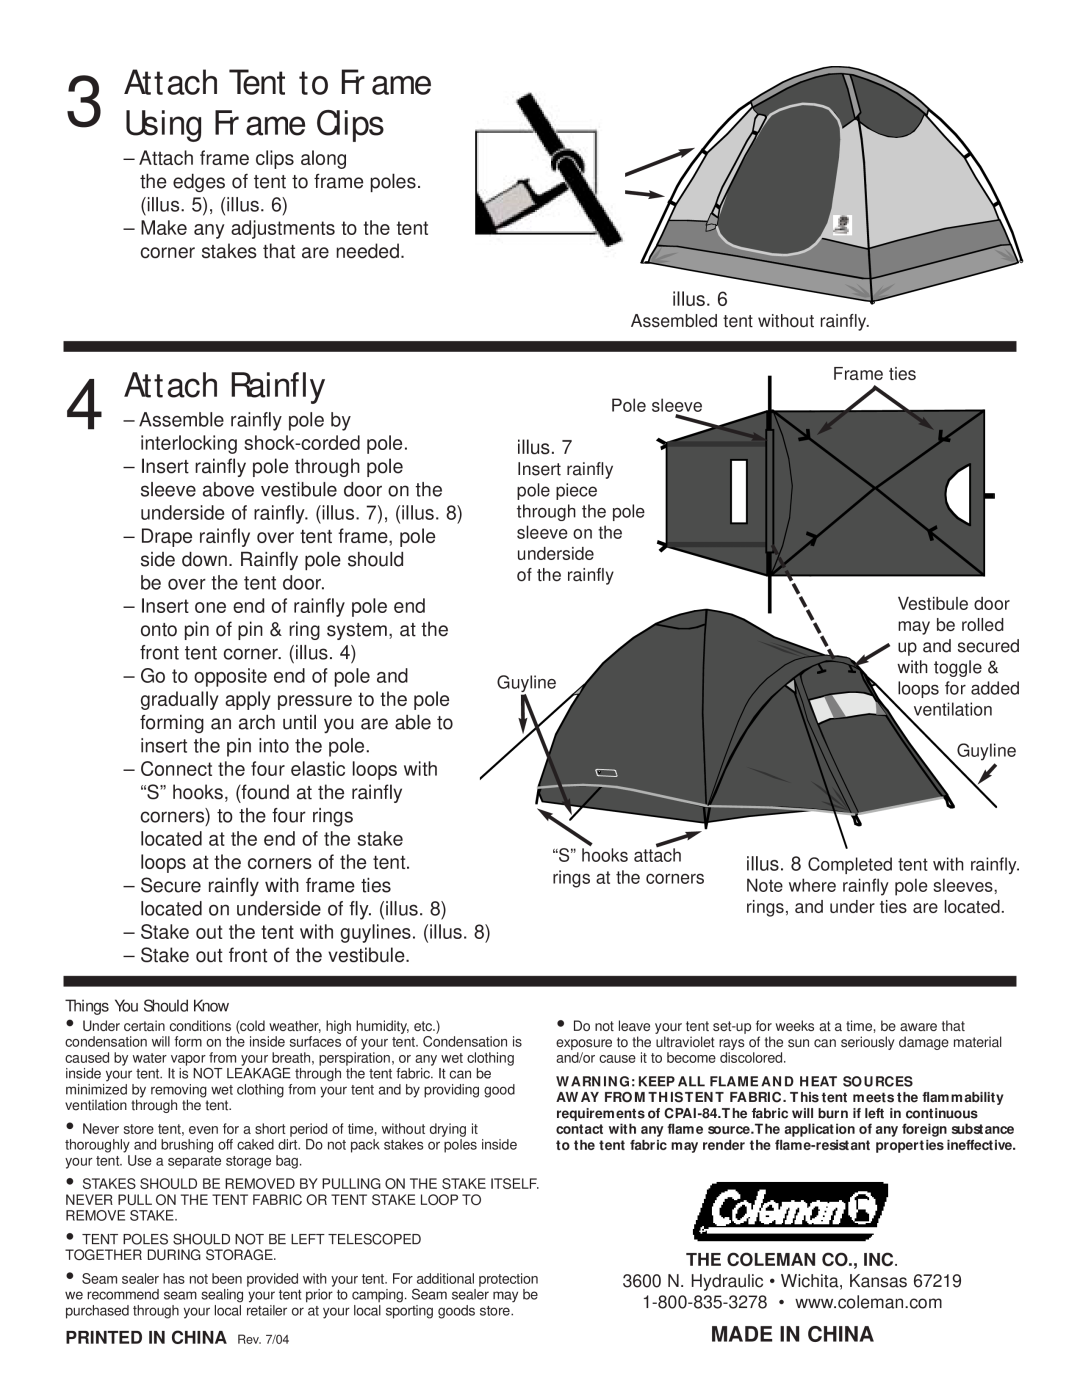 Coleman 9260C727 manual Attach Rainfly, Attach Tent to Frame Using Frame Clips, Made In China 